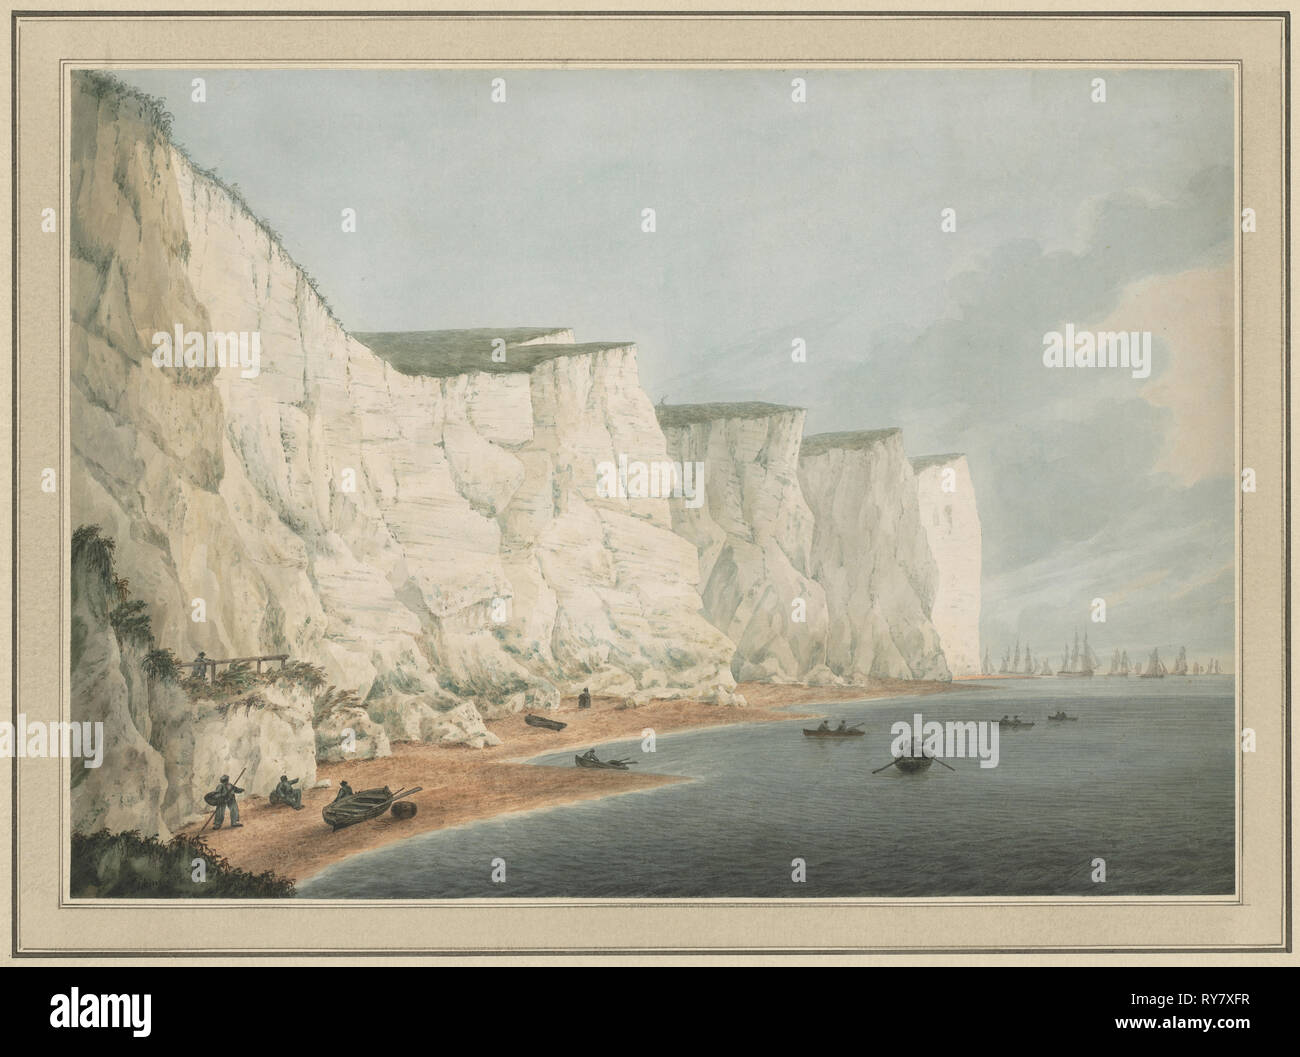 The Fleet Off the Coast, Beachy Head, c. 1790-1805. Samuel Atkins (British, 1760-1810). Watercolor with graphite underdrawing; sheet: 34.4 x 48.4 cm (13 9/16 x 19 1/16 in Stock Photo